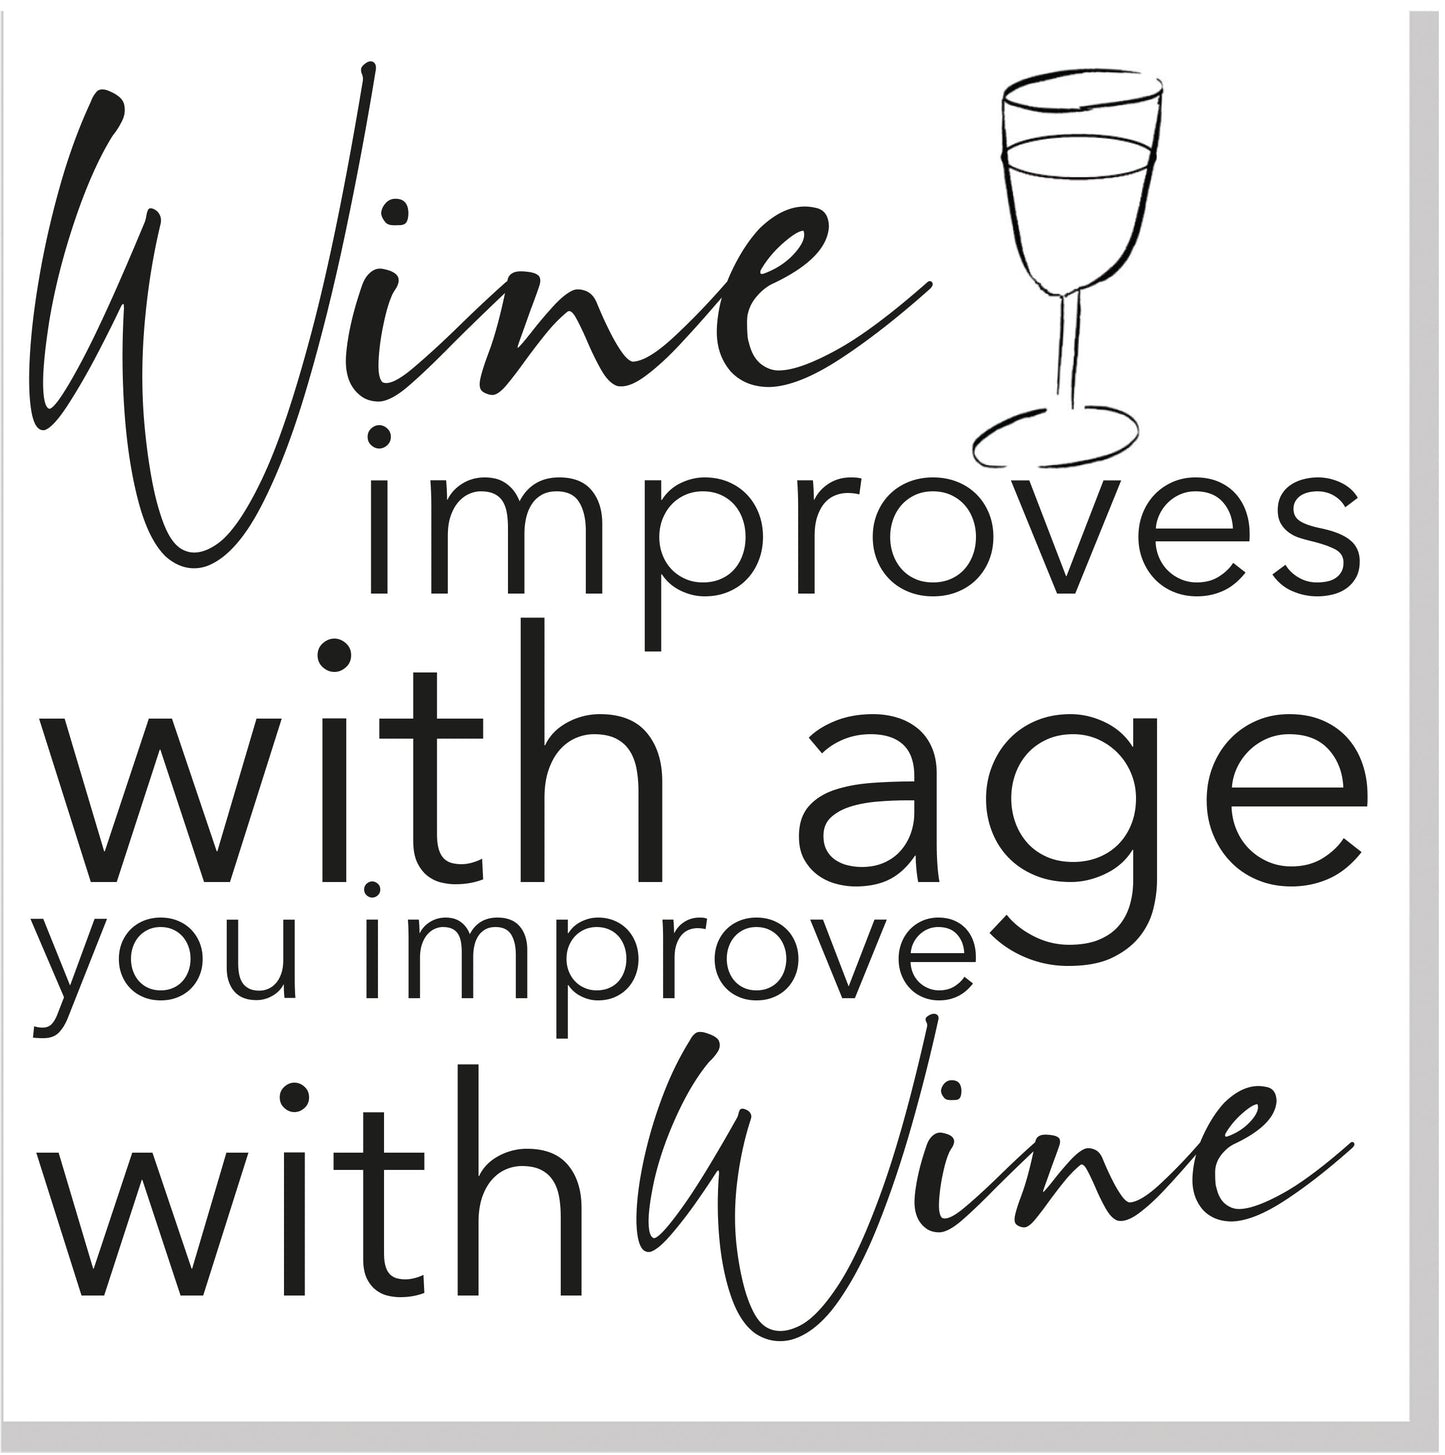 I improve with wine square card